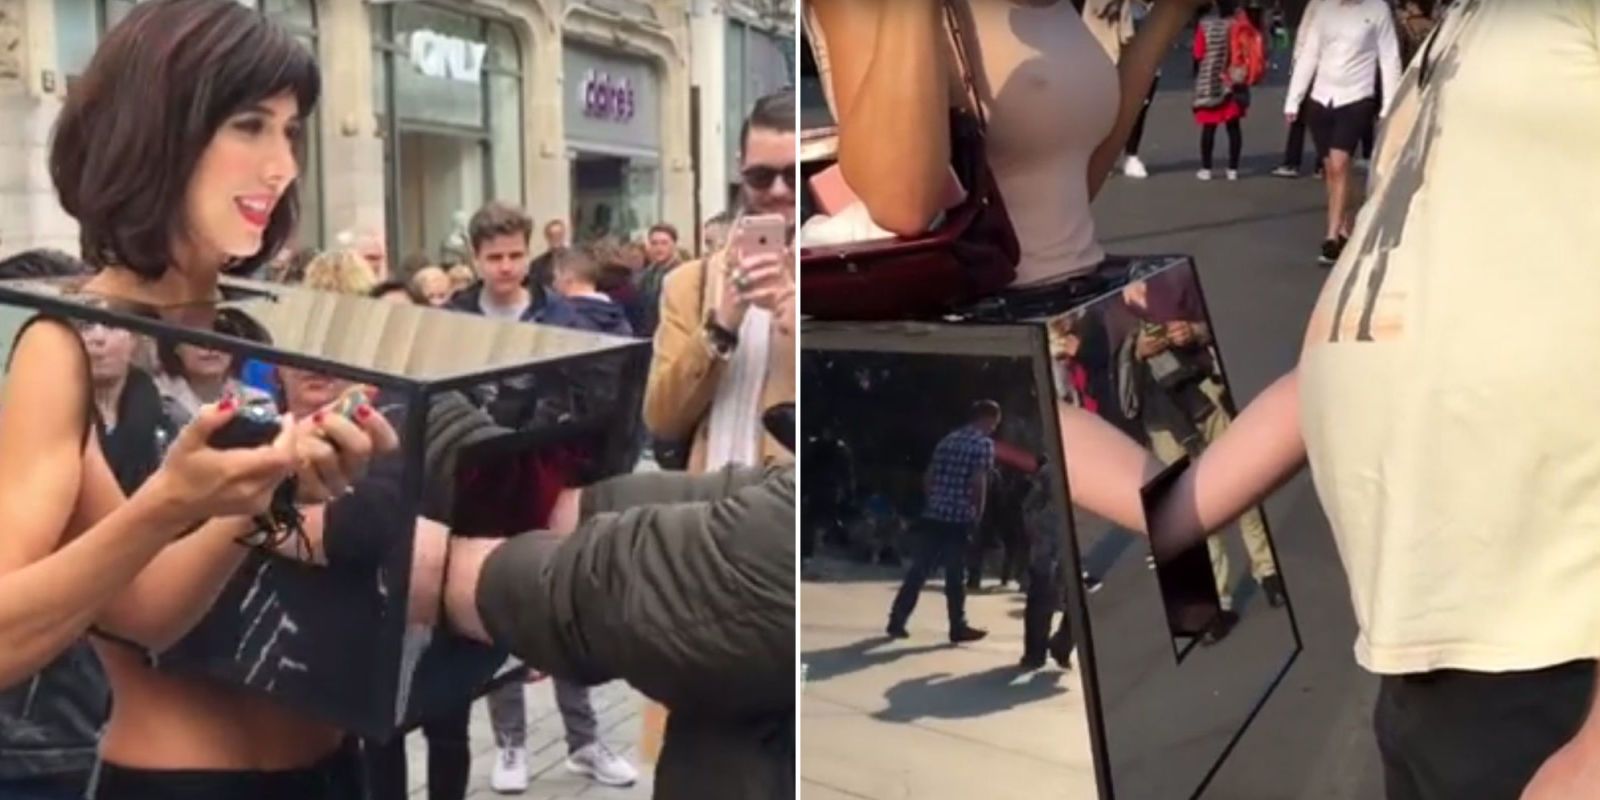 Artist Milo Moire Let People Touch Her Vagina in Public picture pic